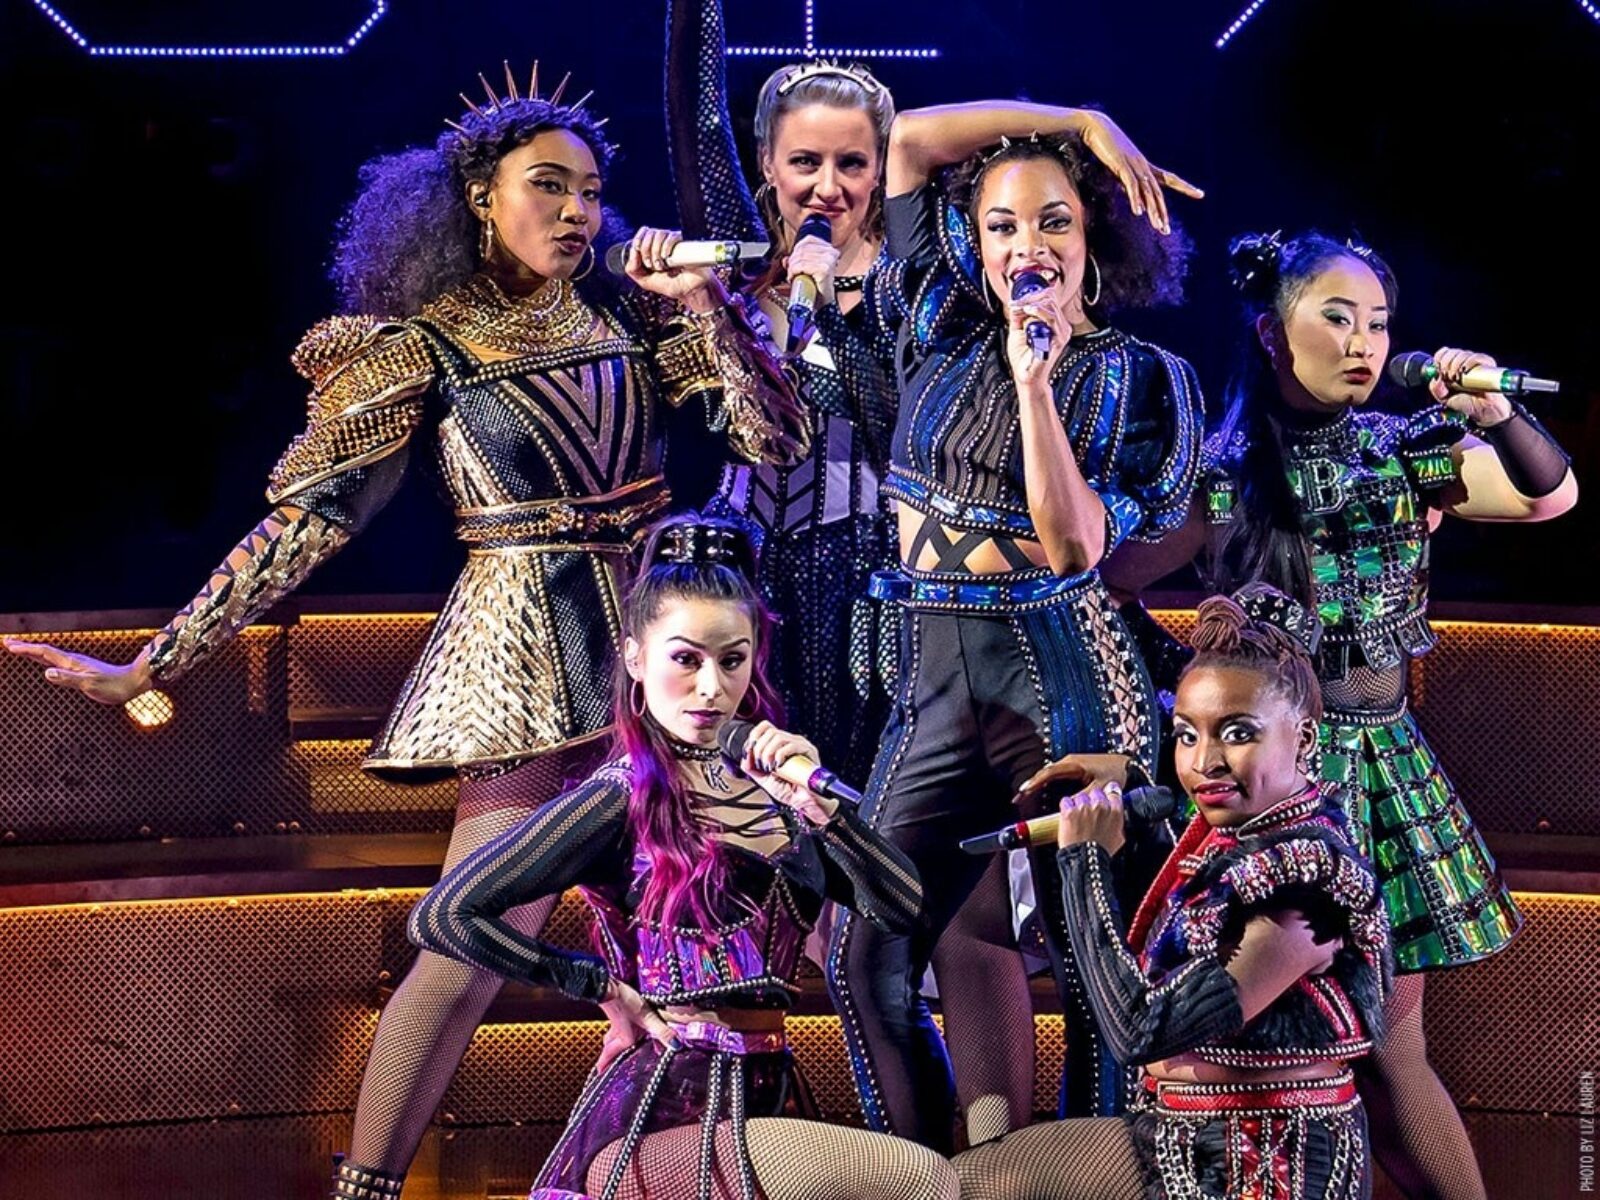 Six The Musical Discount Broadway Tickets Including Discount Code and Ticket Lottery